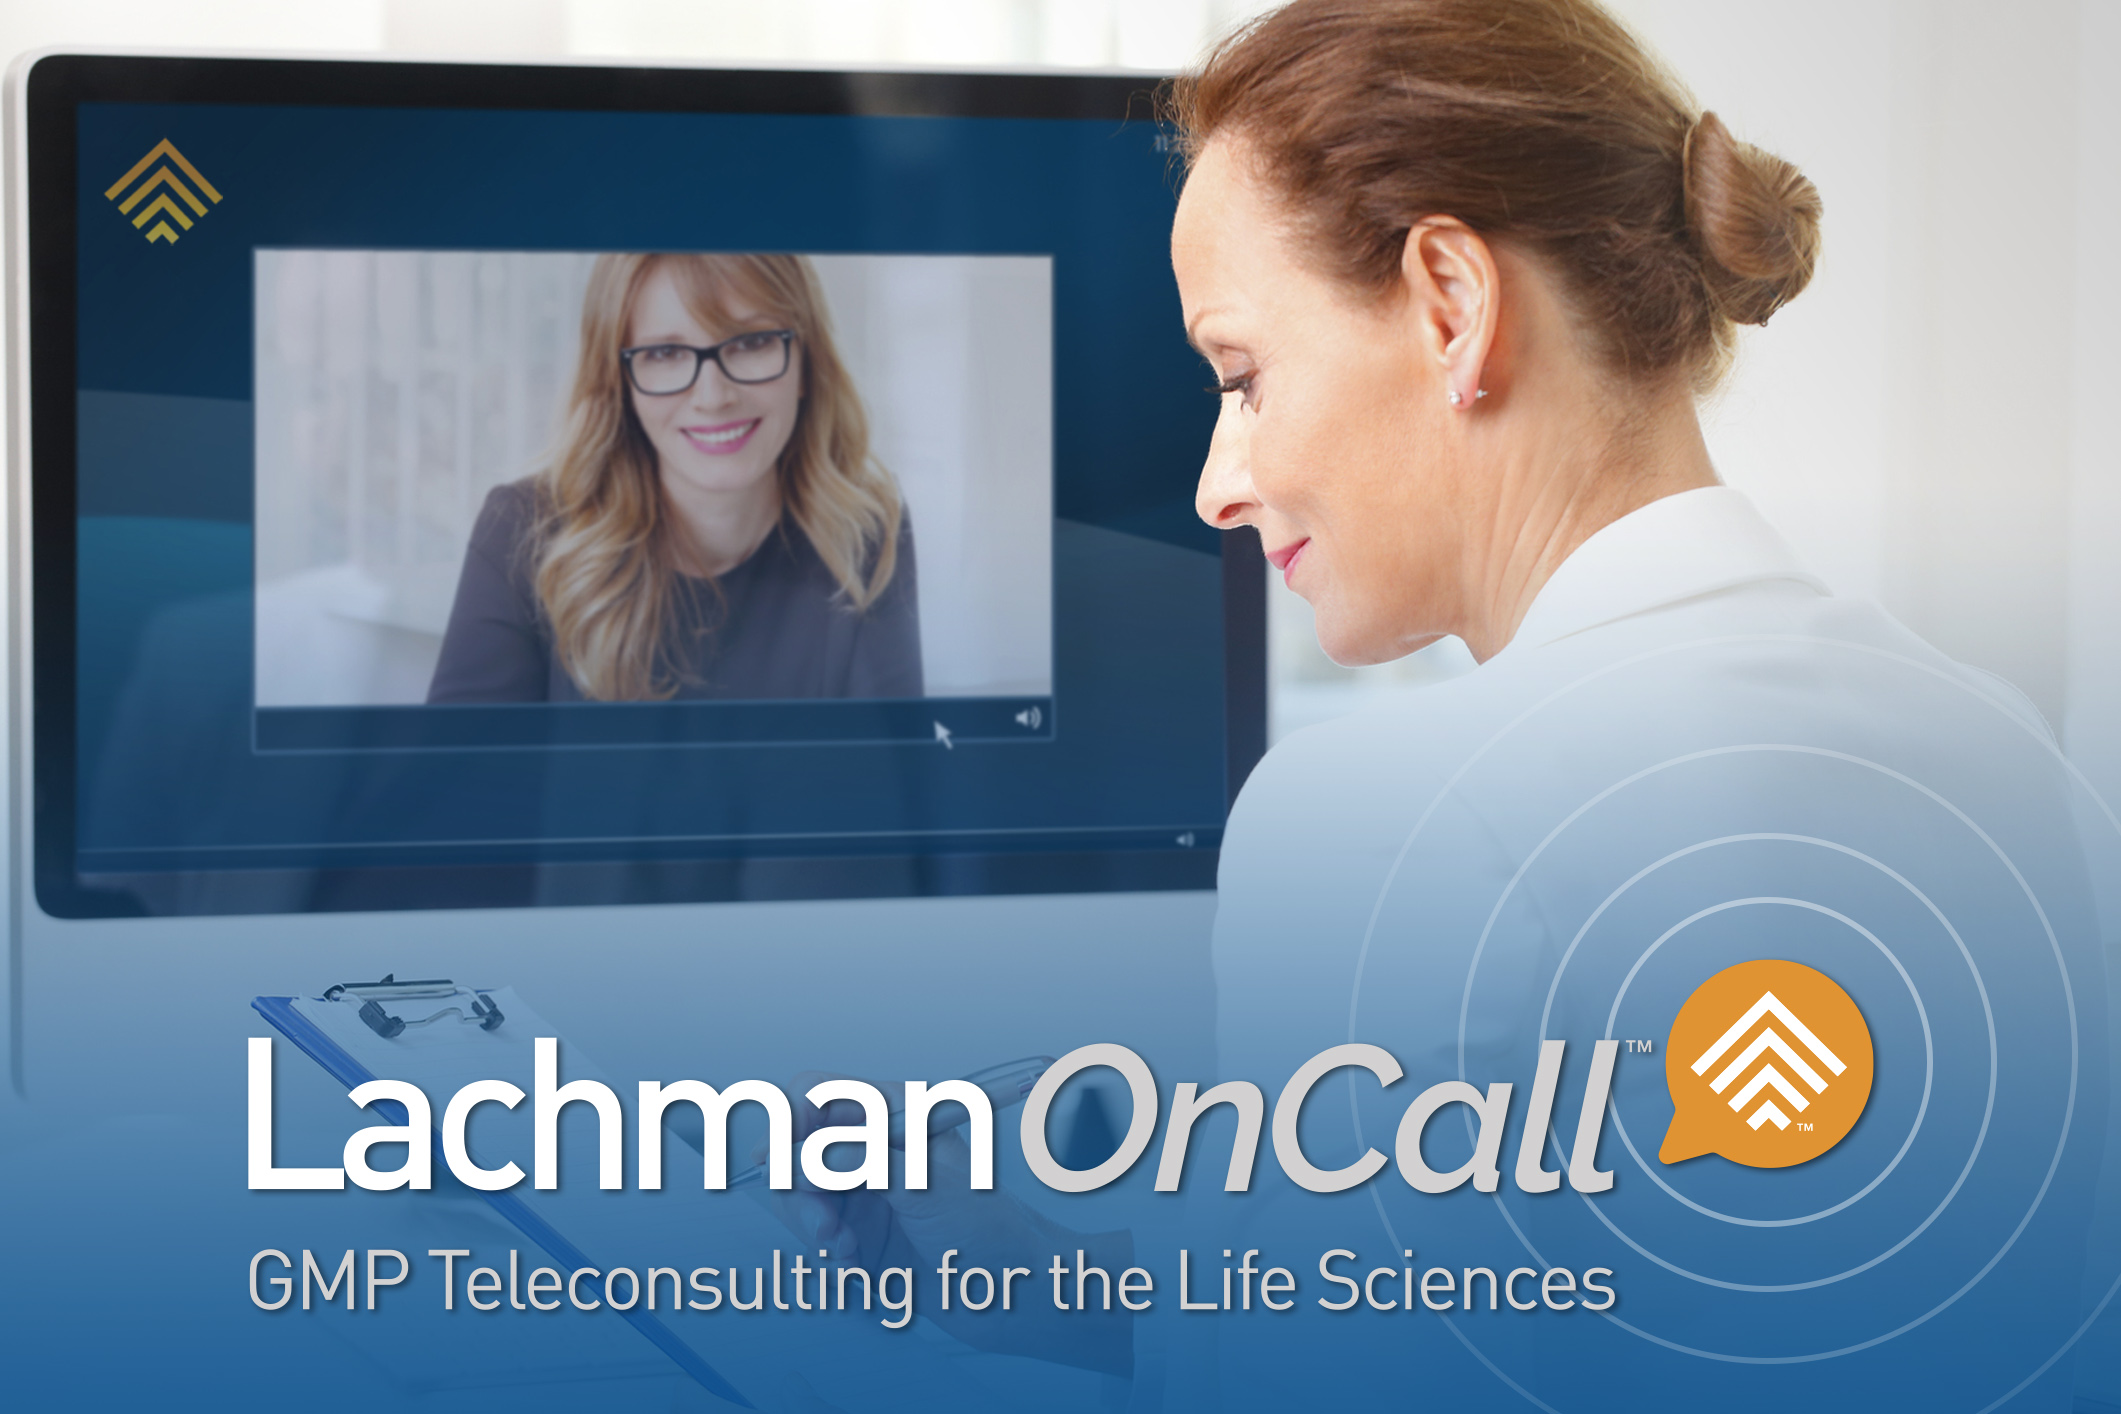 Lachman OnCall™ SMEs are available normal business hours Monday through Friday from 9:00 am – 5:00 pm ET.